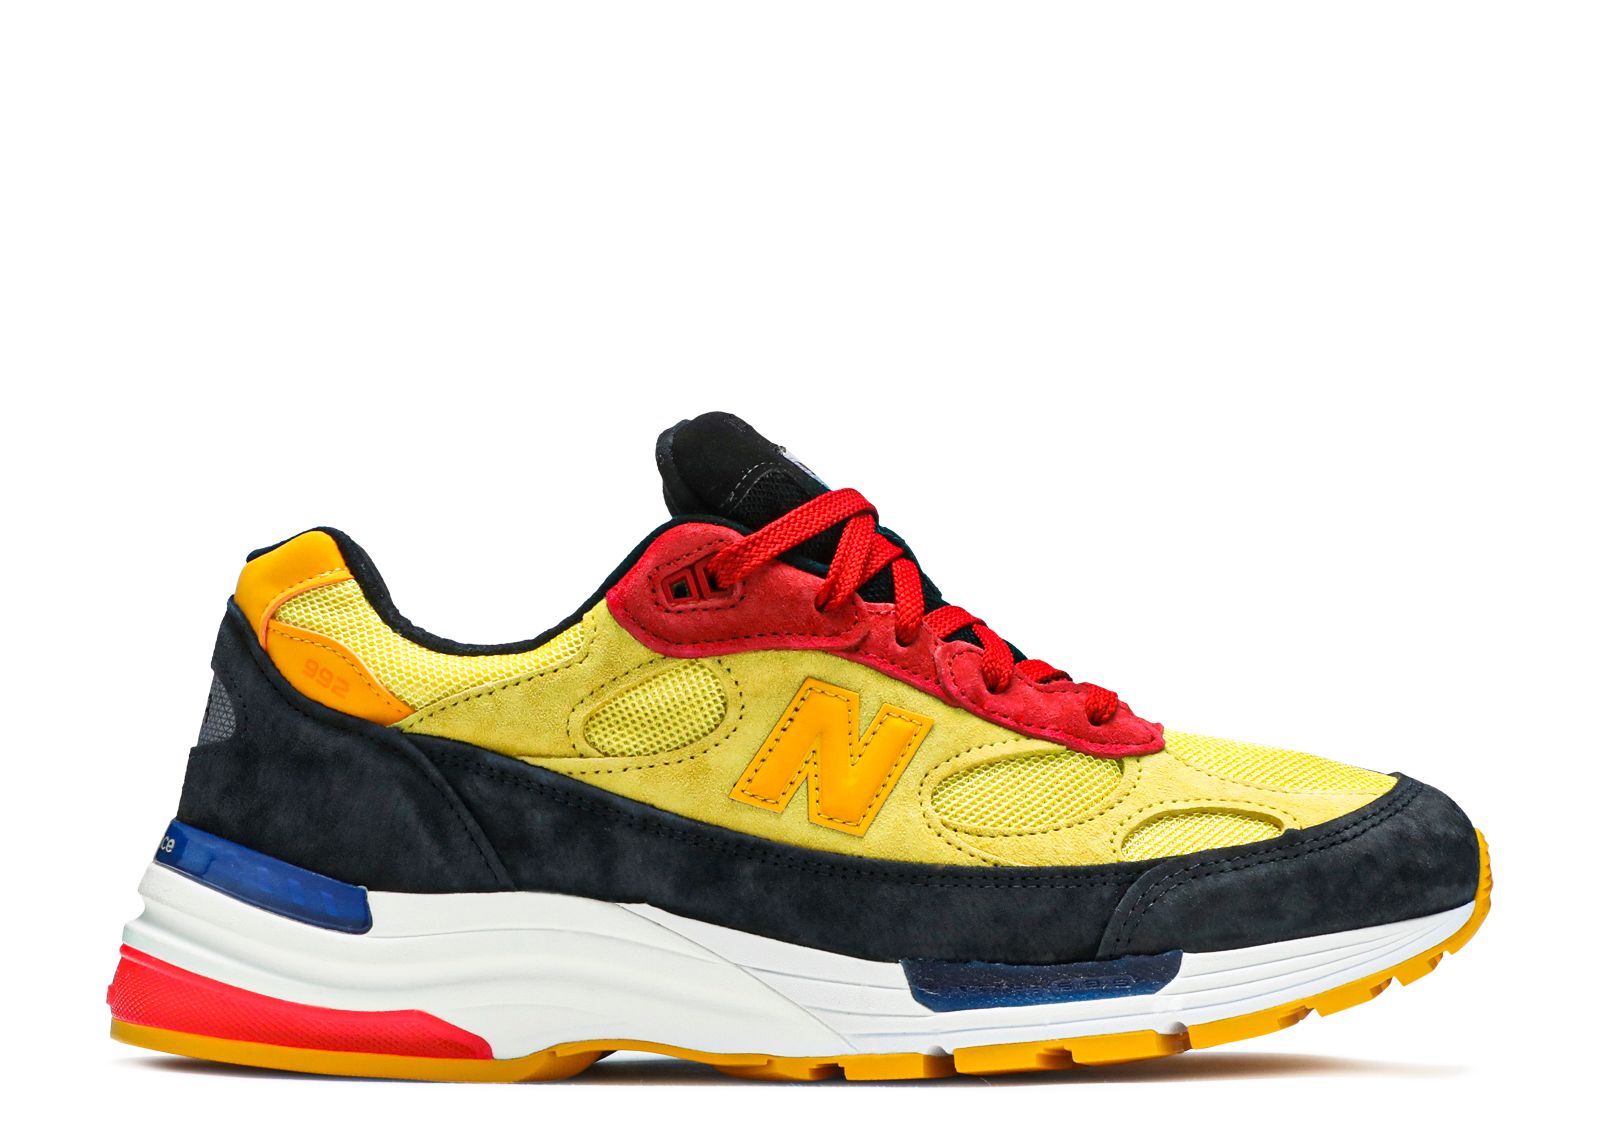 New Balance 992 in Yellow, Red, and Black